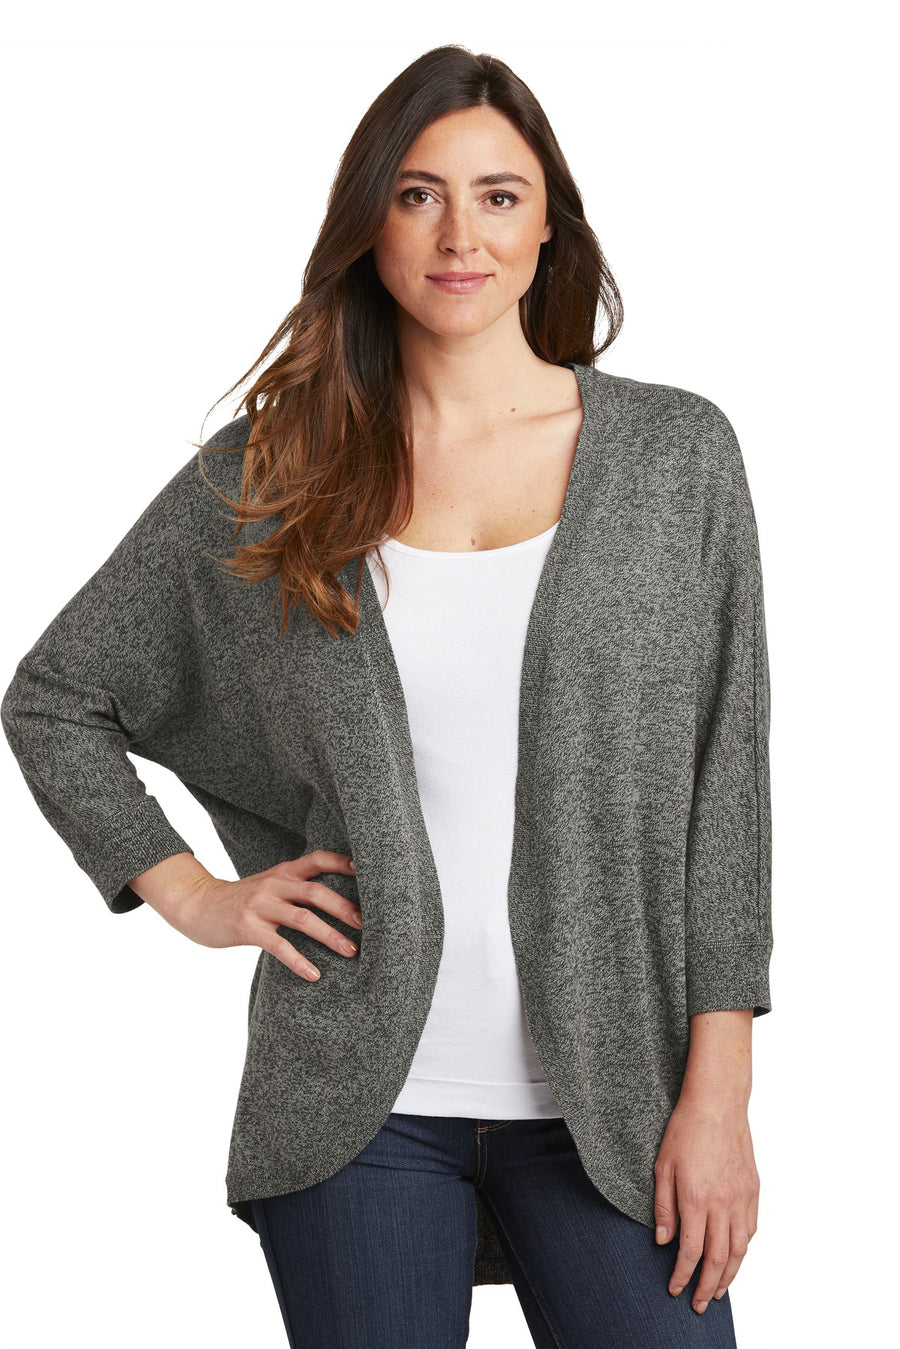 Port Authority Marled Cocoon Sweater.